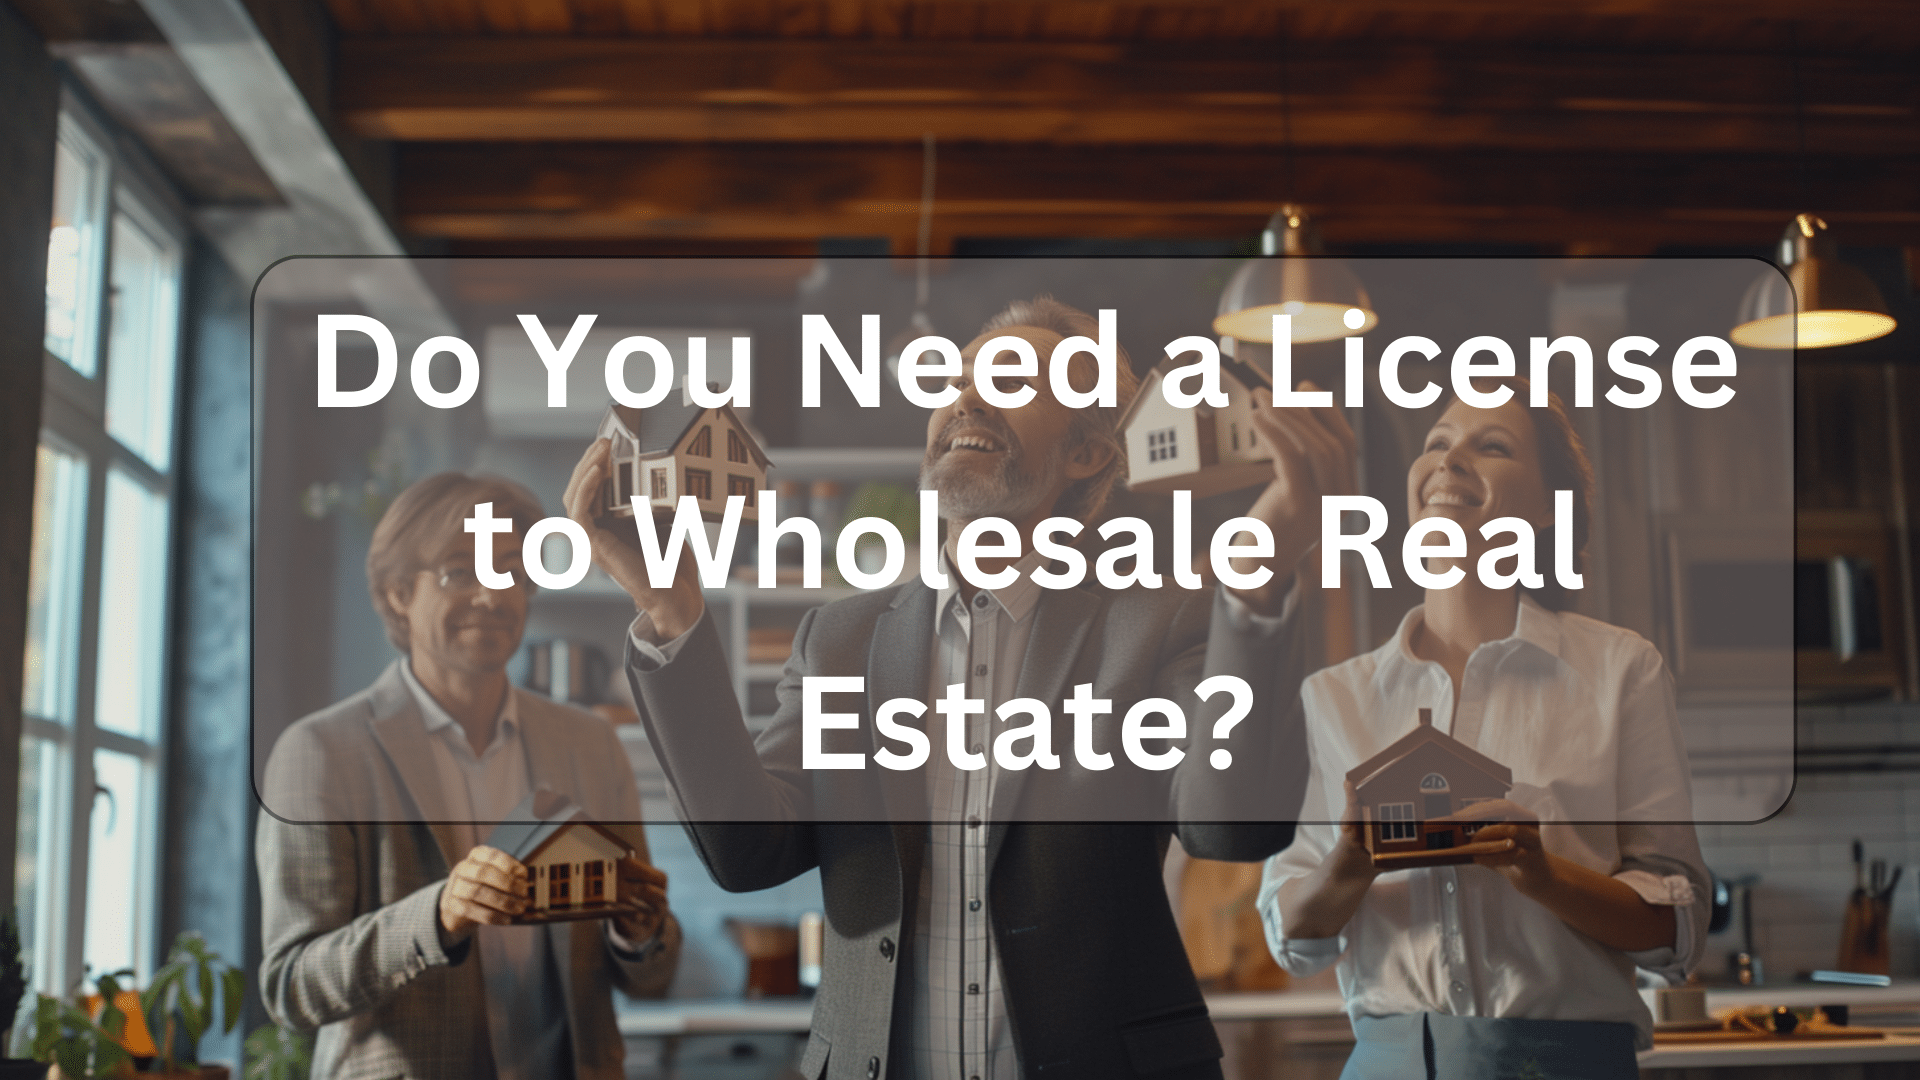 Do you need a license to wholesale real estate illustration